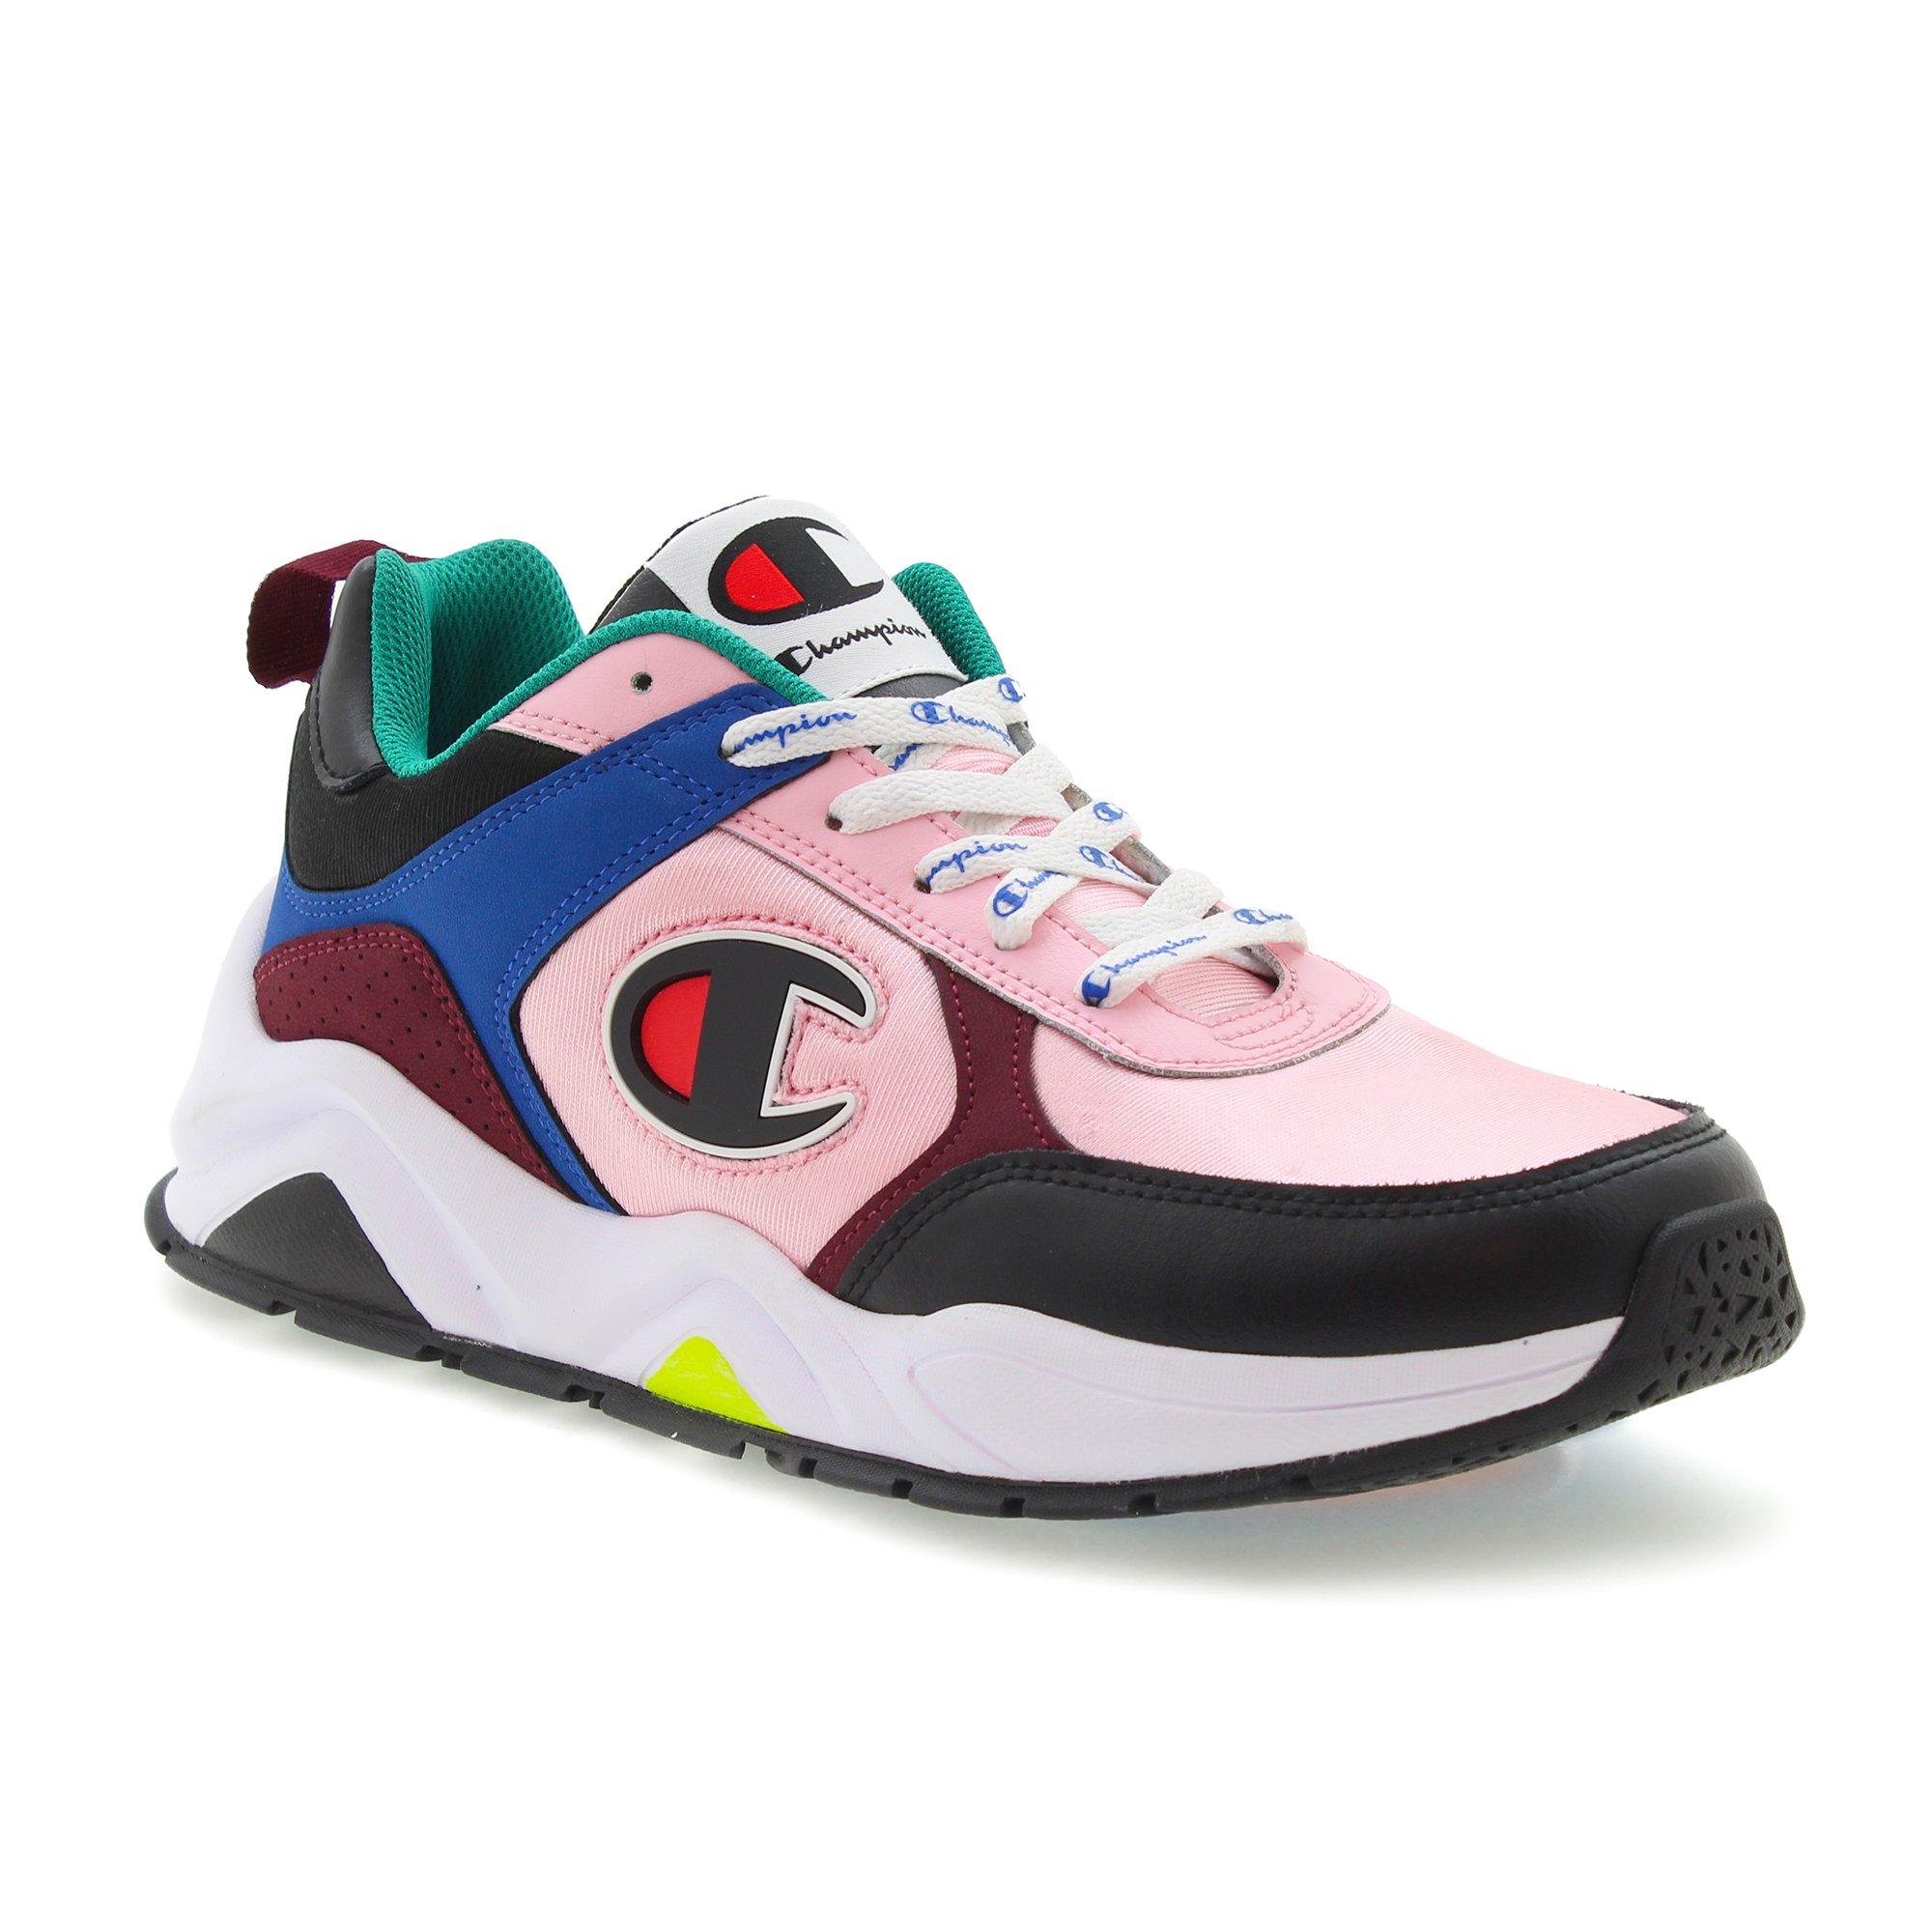 champion shoes pink